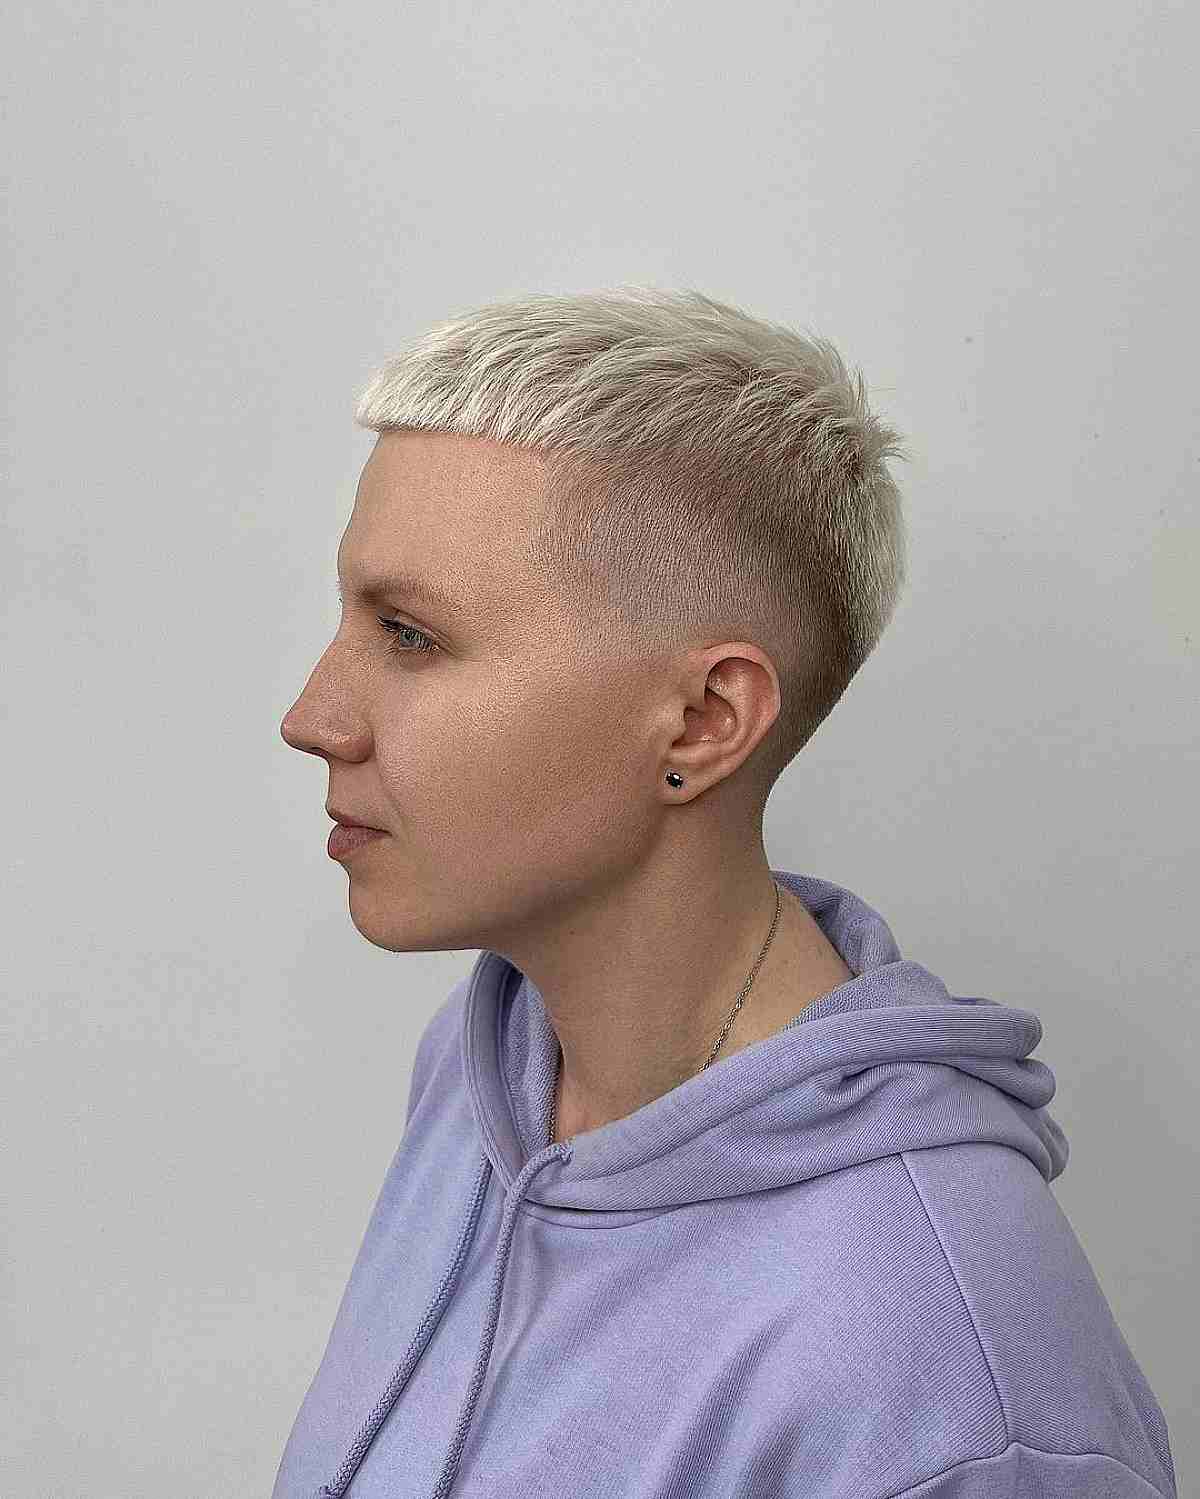 69 Very Short Pixie Haircuts for Confident Women